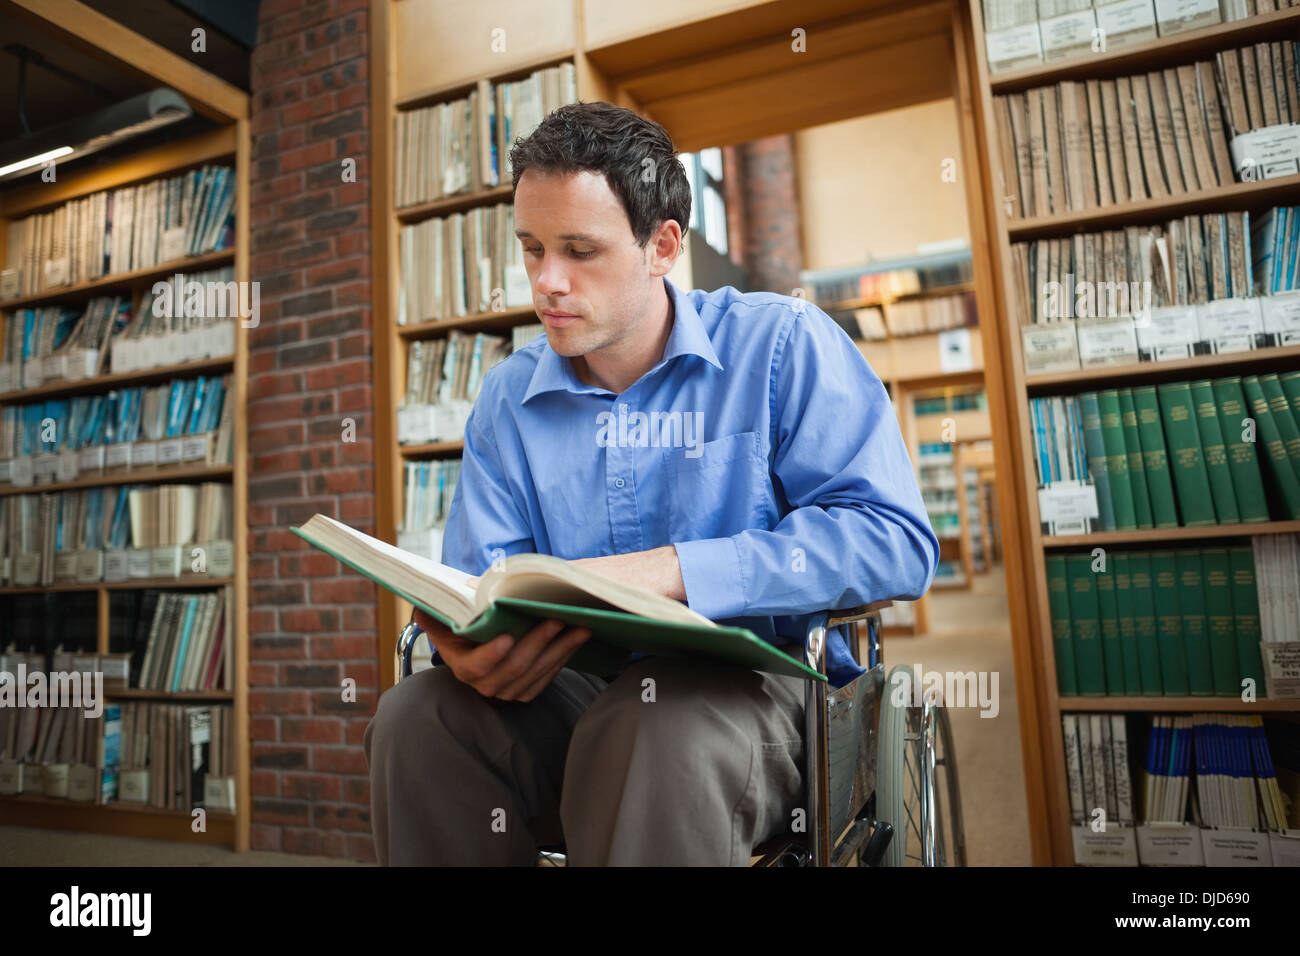 Serious man in wheelchair looking at a book Stock Photo